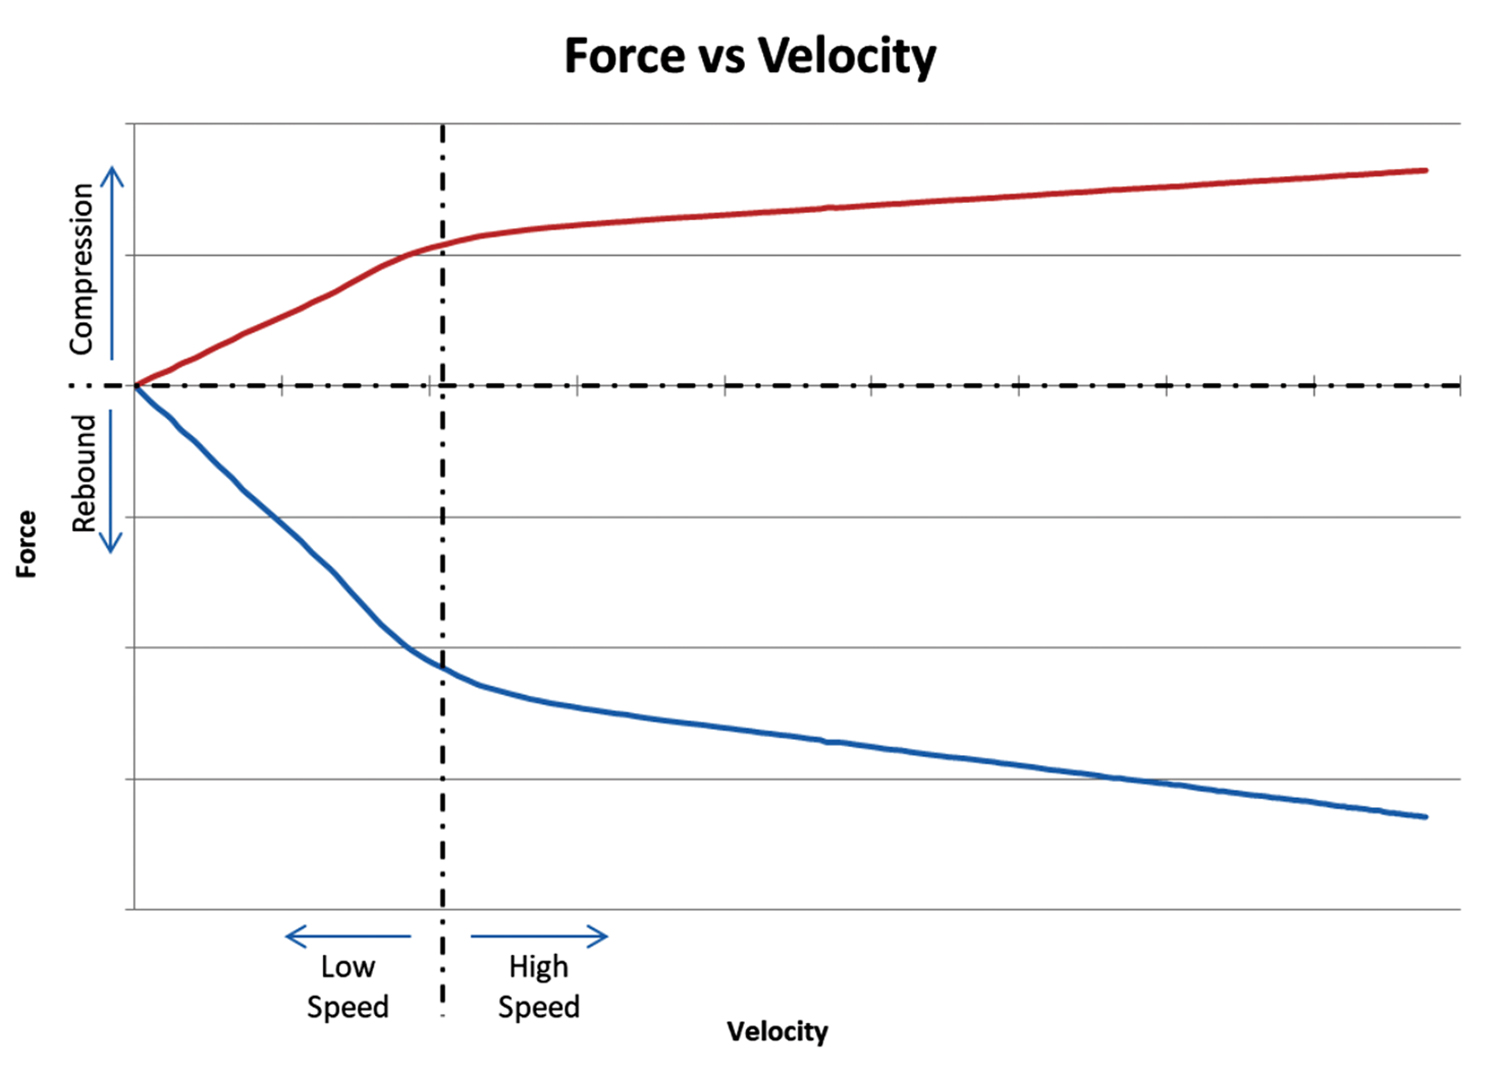 a shocks graph from JRi displaying the relationship of force generated by the shock in the x (vertical) axis versus shaft speed in the y (horizontal) axis expressed in inches per second of velocity